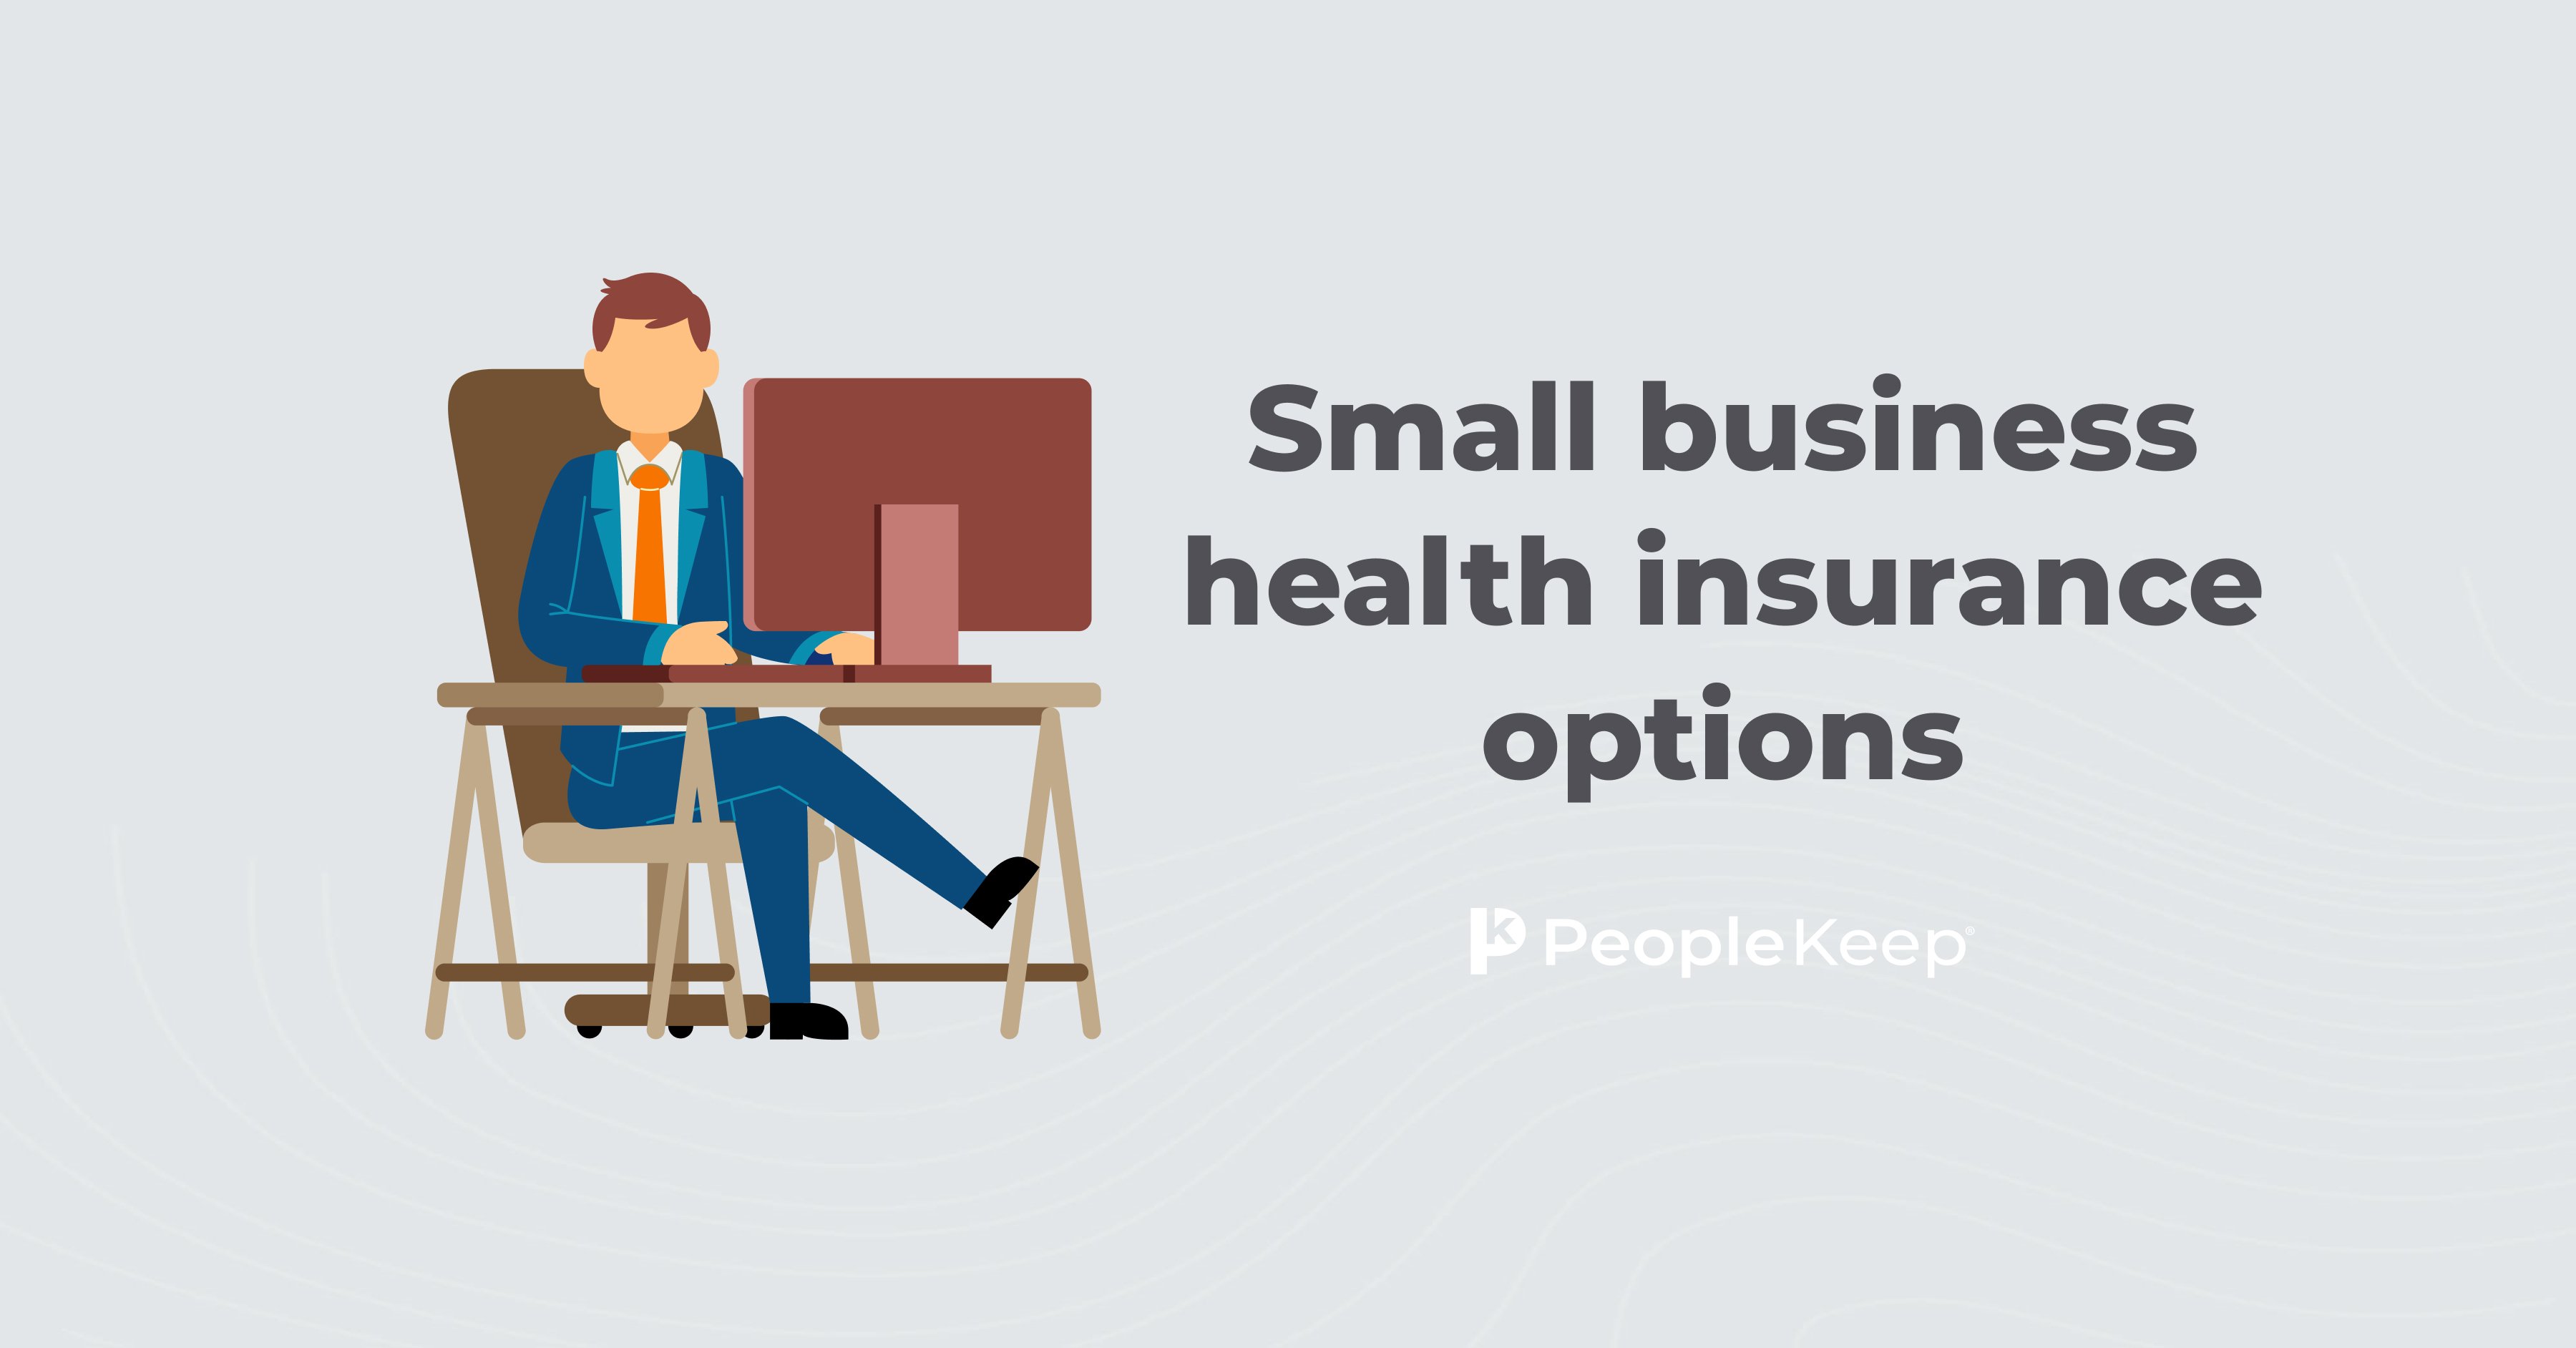 Small business health insurance options